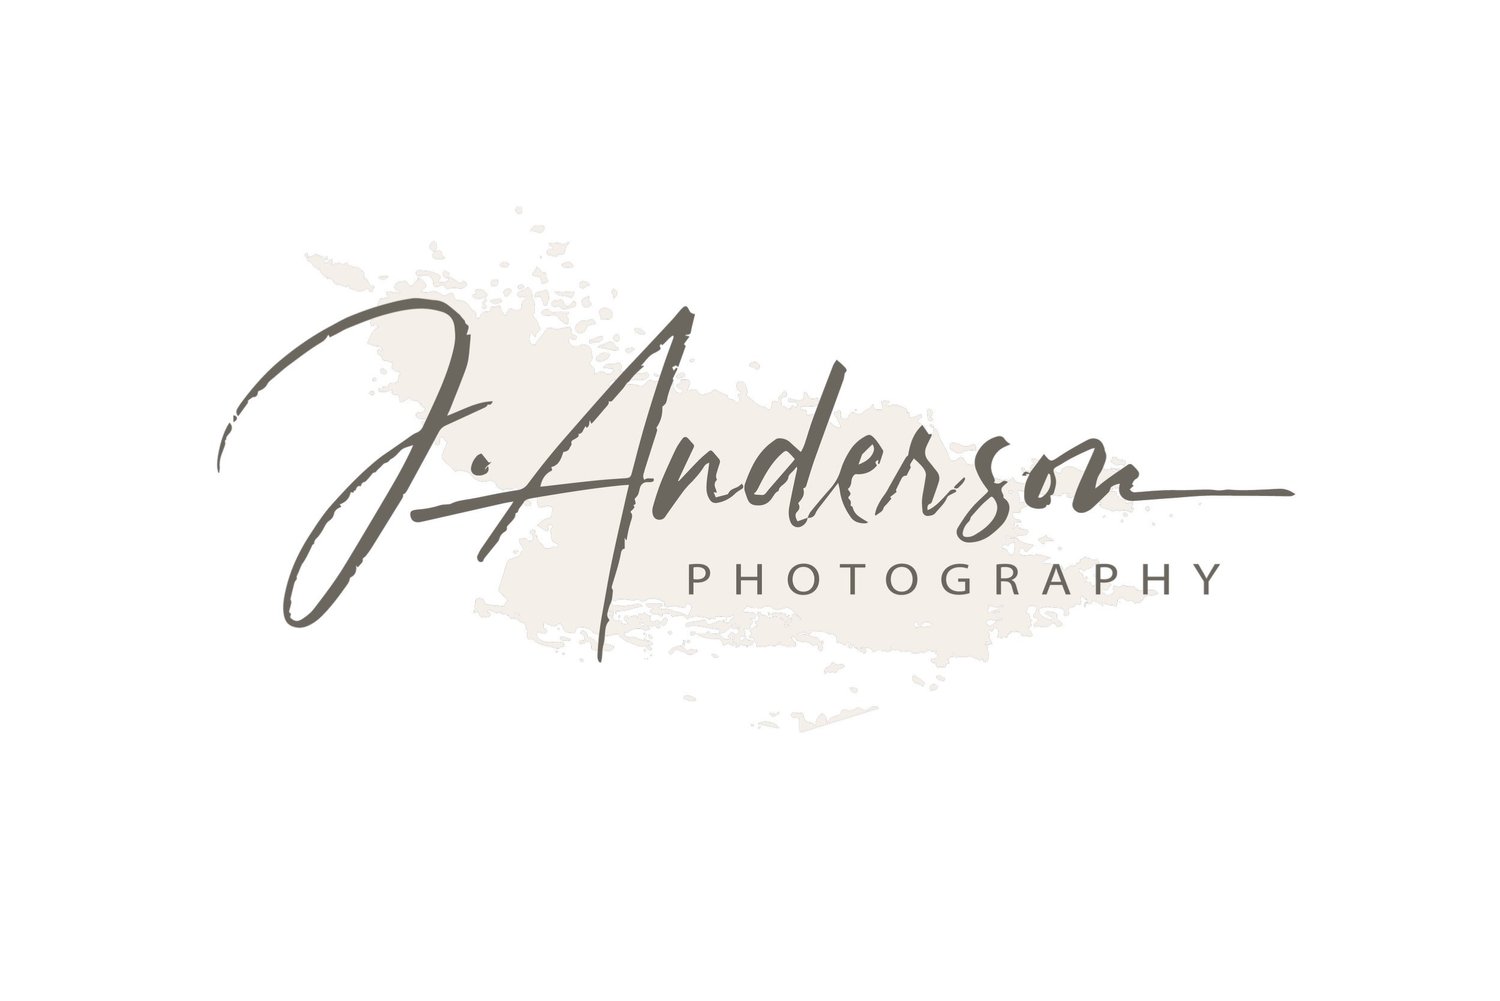 J. Anderson Photography